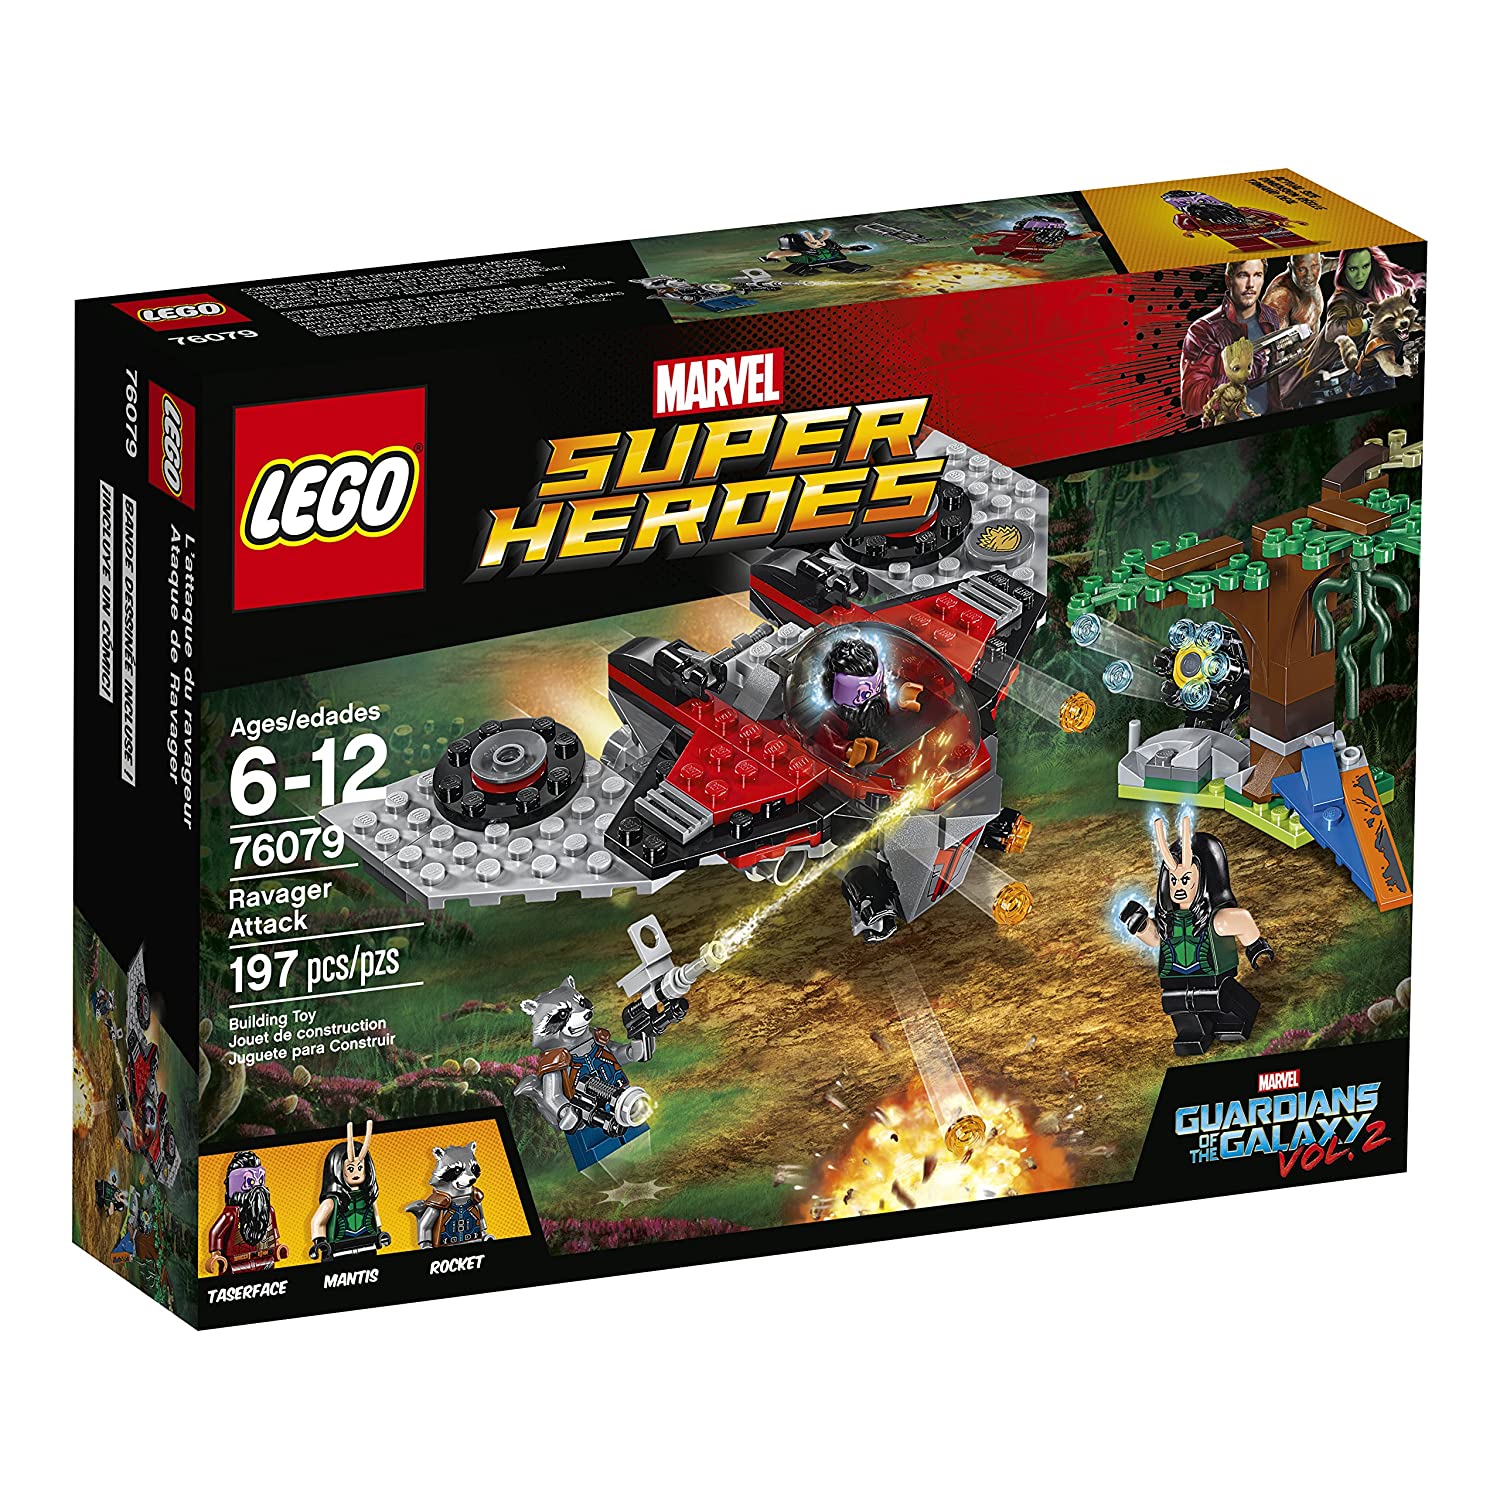 Top 7 Best LEGO Guardians of the Galaxy Sets Reviews in 2022 5